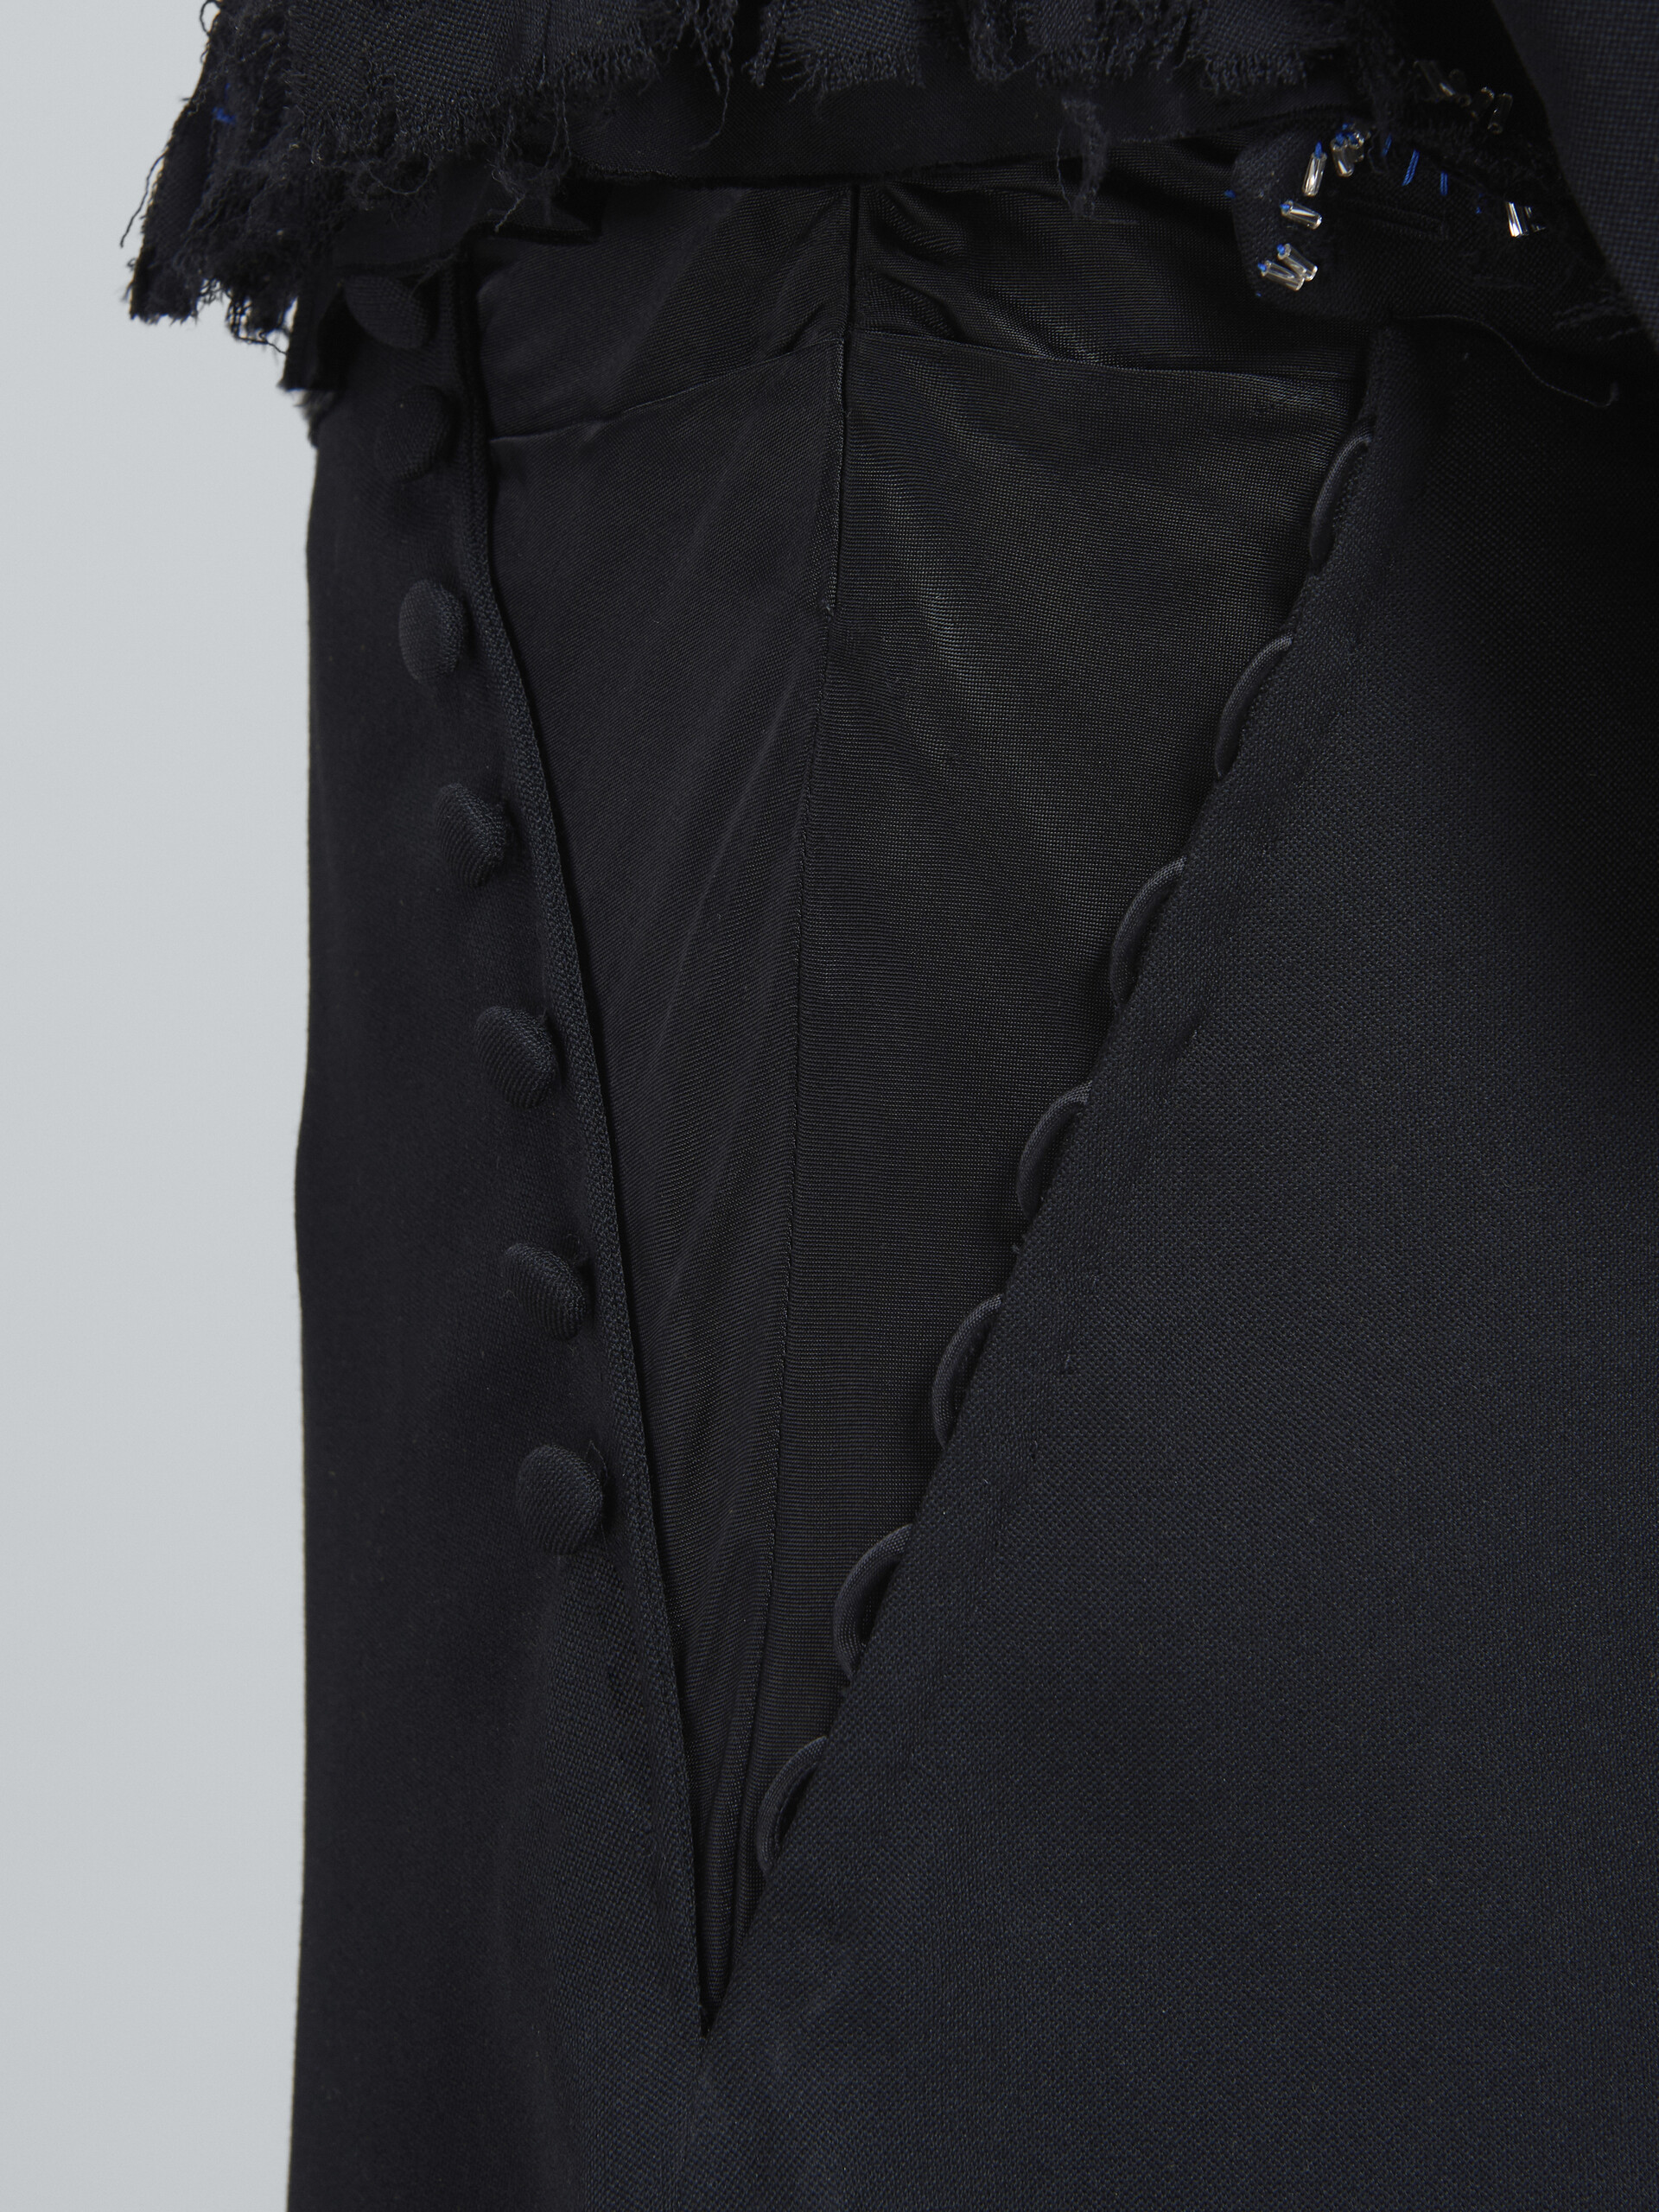 Black wool skirt with embroidery - Skirts - Image 4